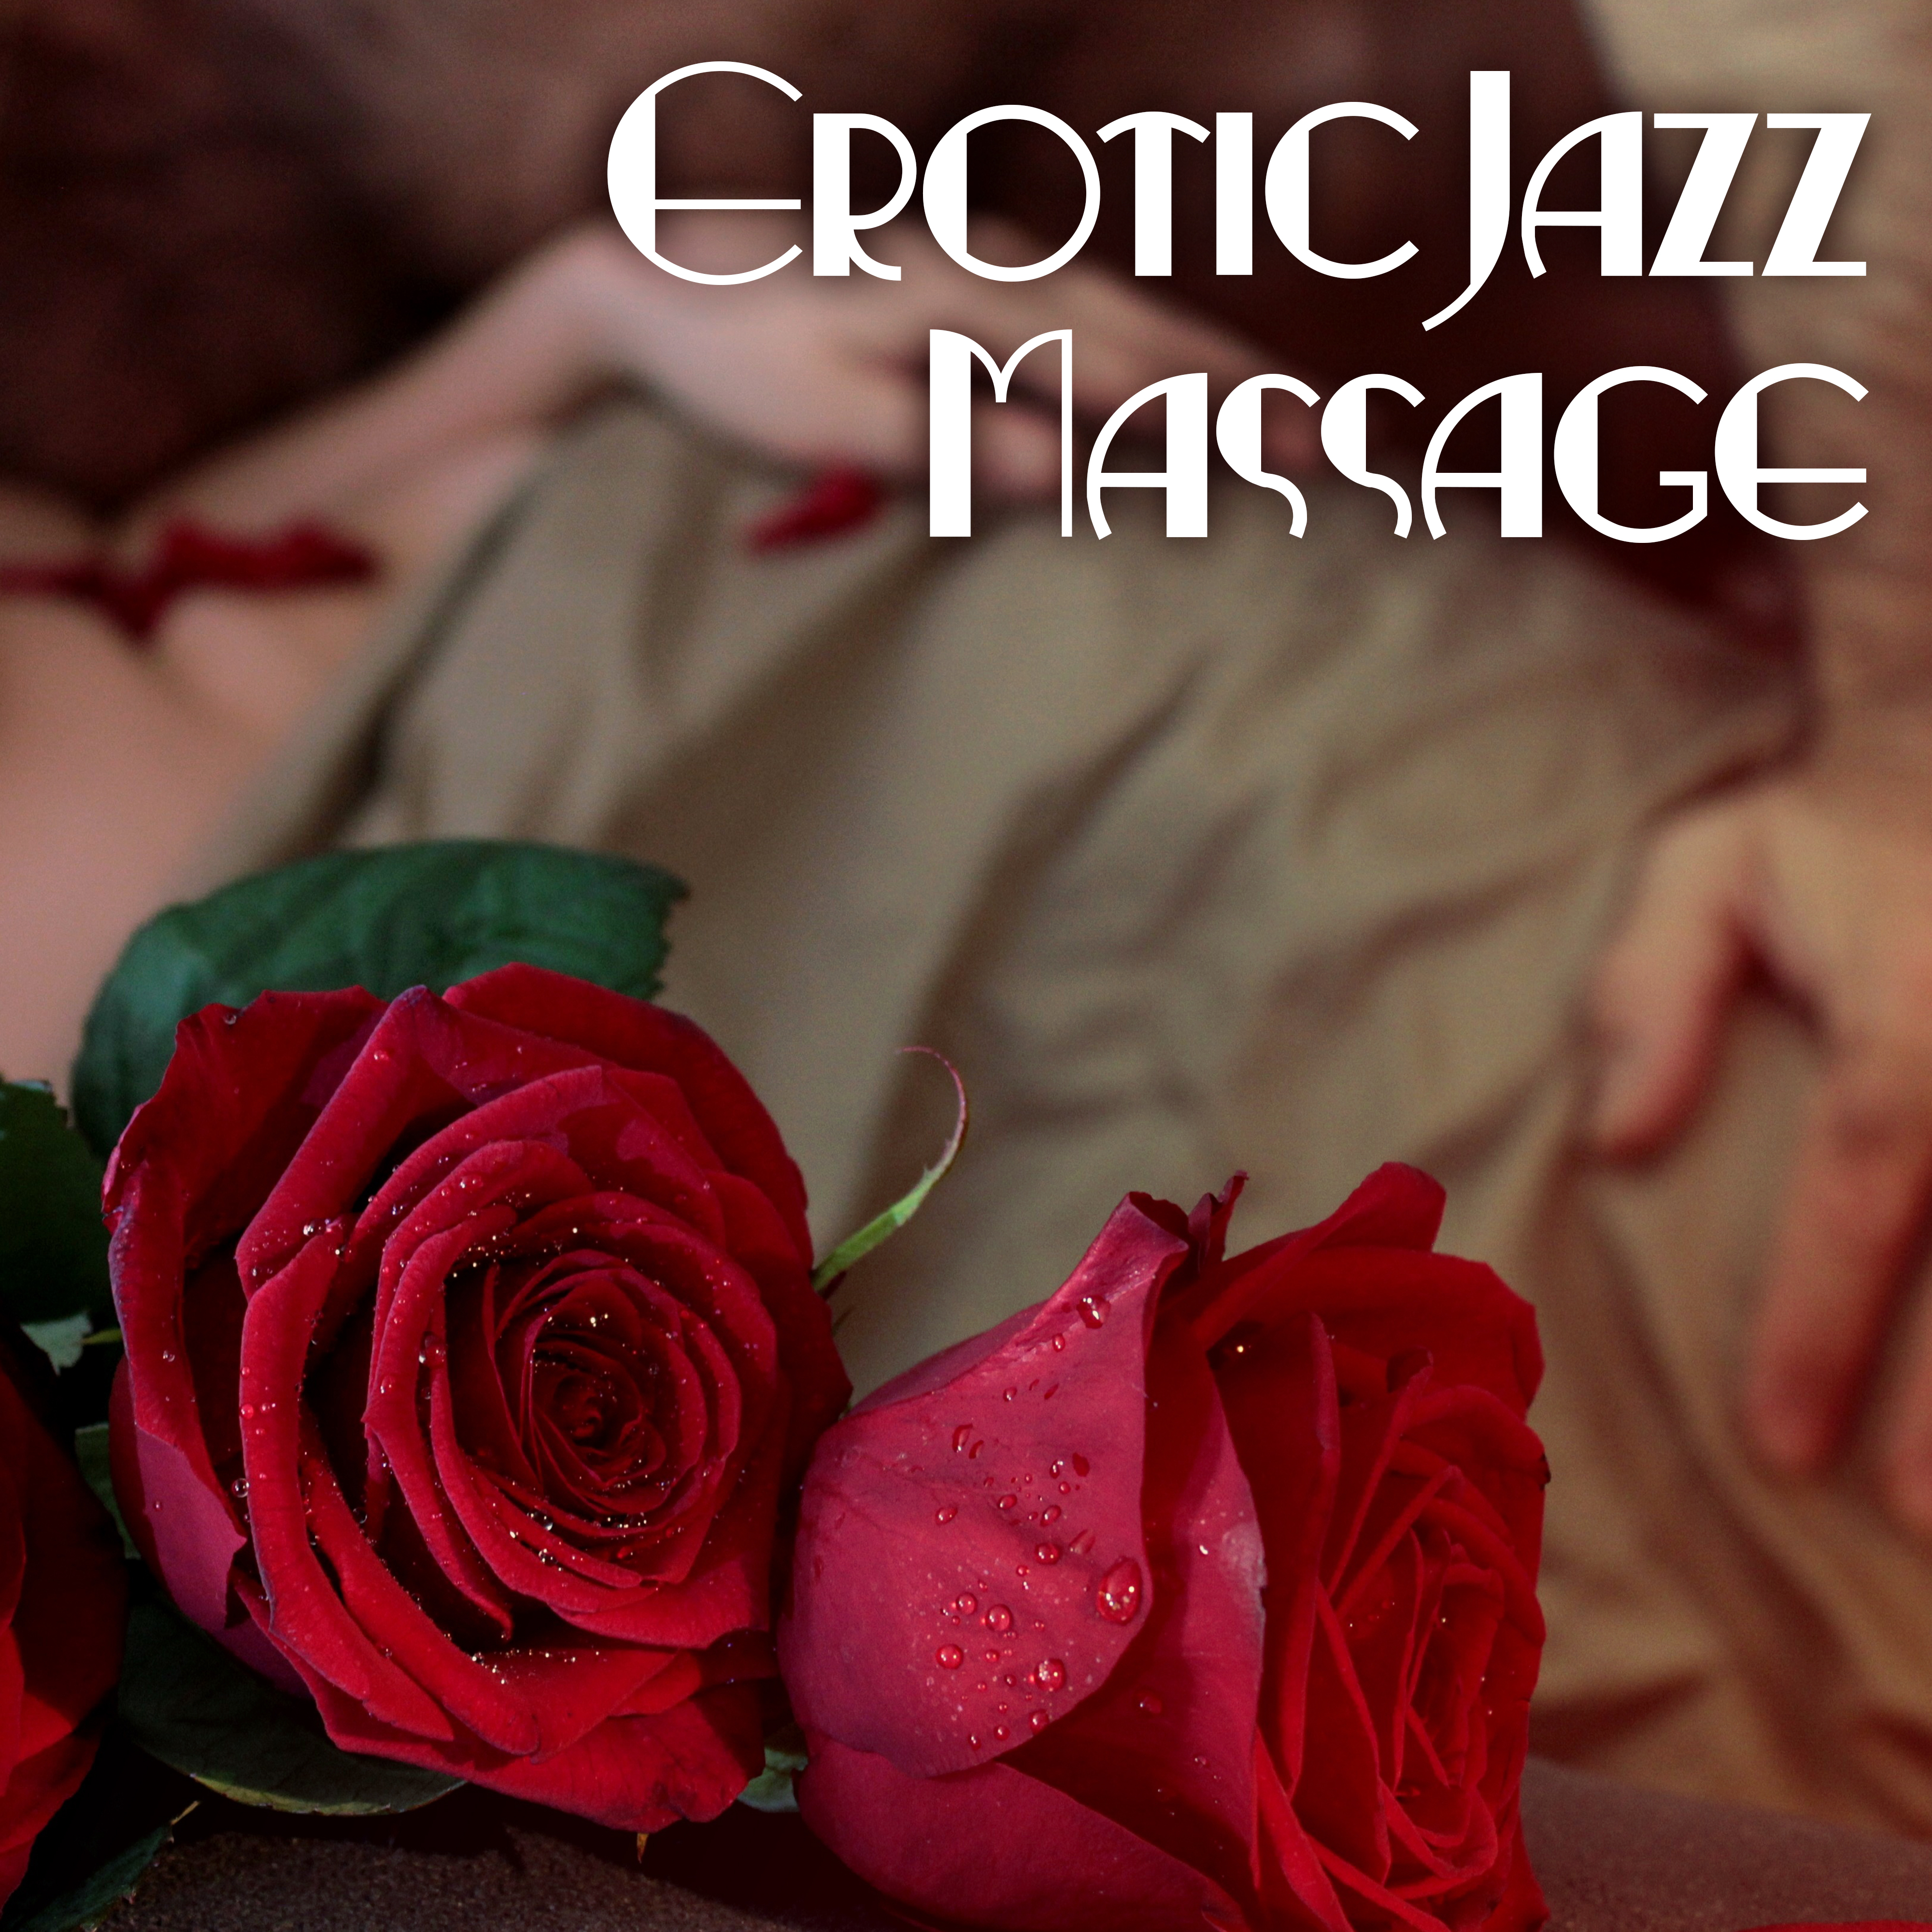 Erotic Jazz Massage – Romantic Evening, **** Jazz Music, Smooth Sounds to Relax, Lovers Melodies